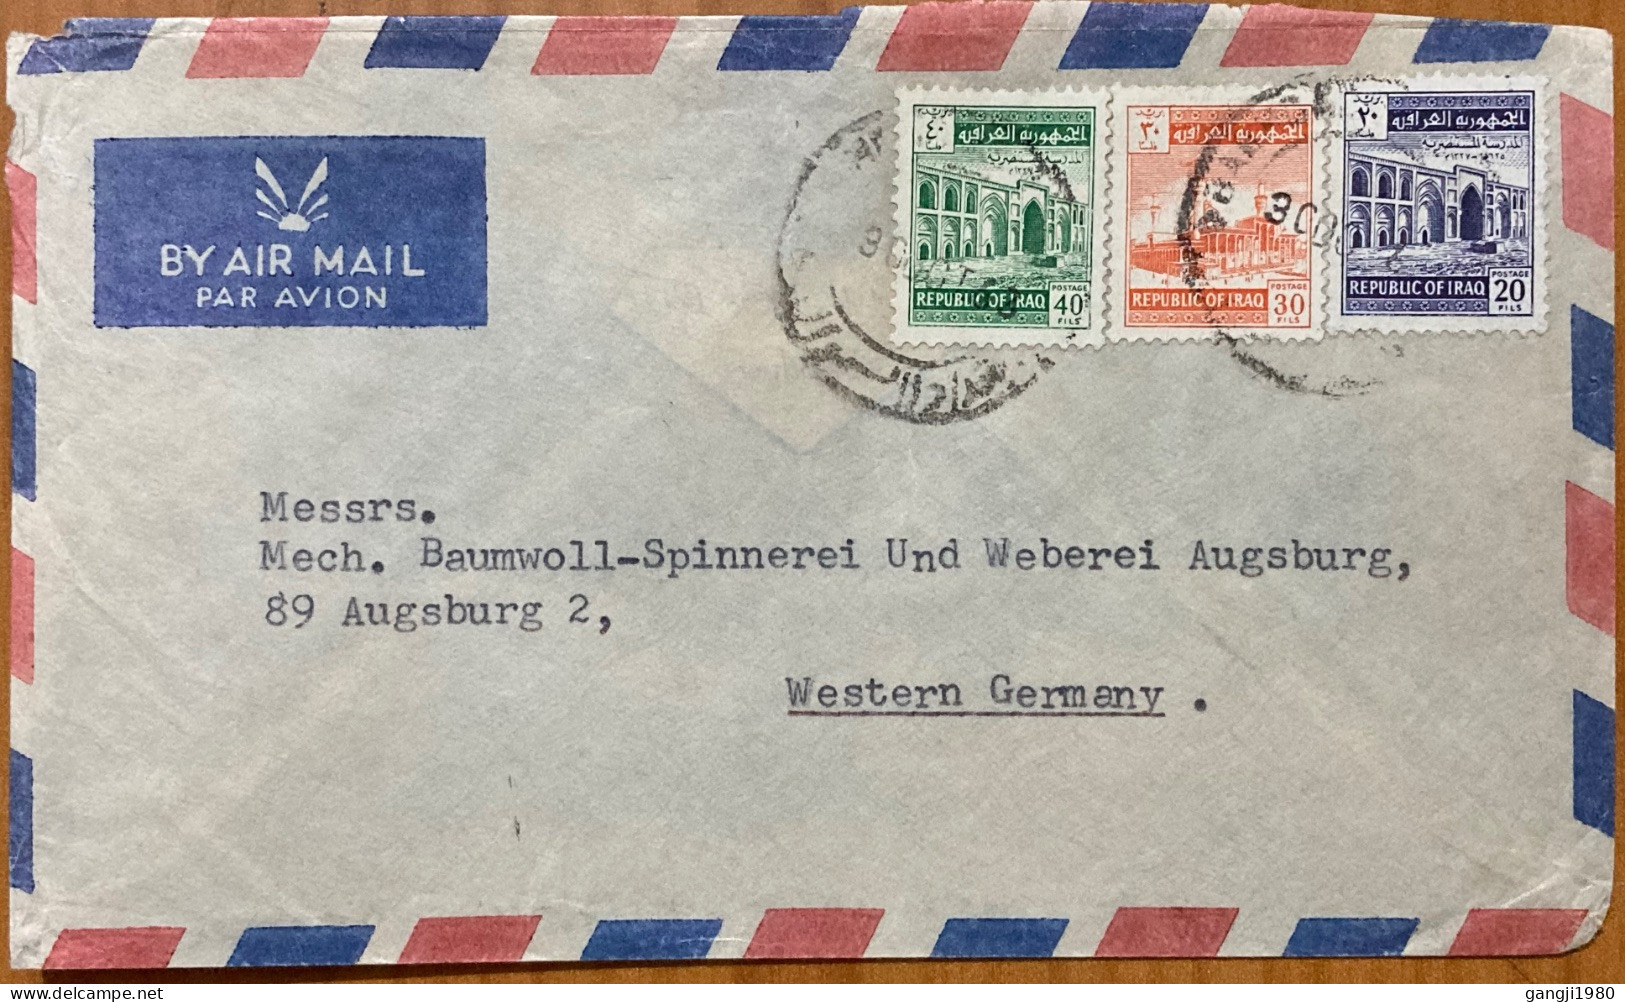 IRAQ 1963, CENSOR COVER, USED TO GERMANY, ADVERTISING EMILE MEGARBANE & CO, SCHOOL, MOSQUE & MINARETS, BAGHDAD  CITY CAN - Iraq